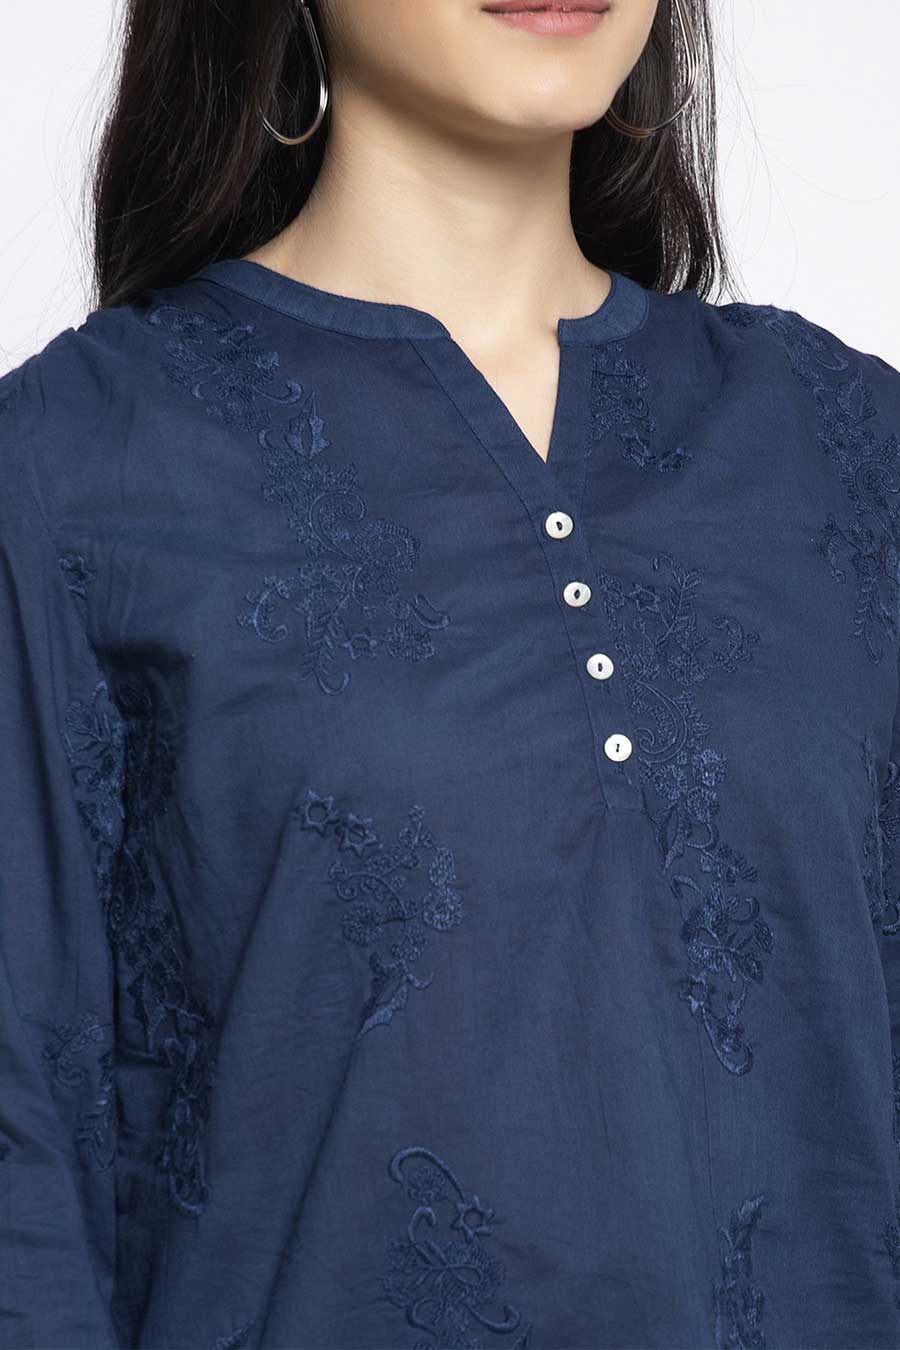 Navy Blue Floral Embroidered Top